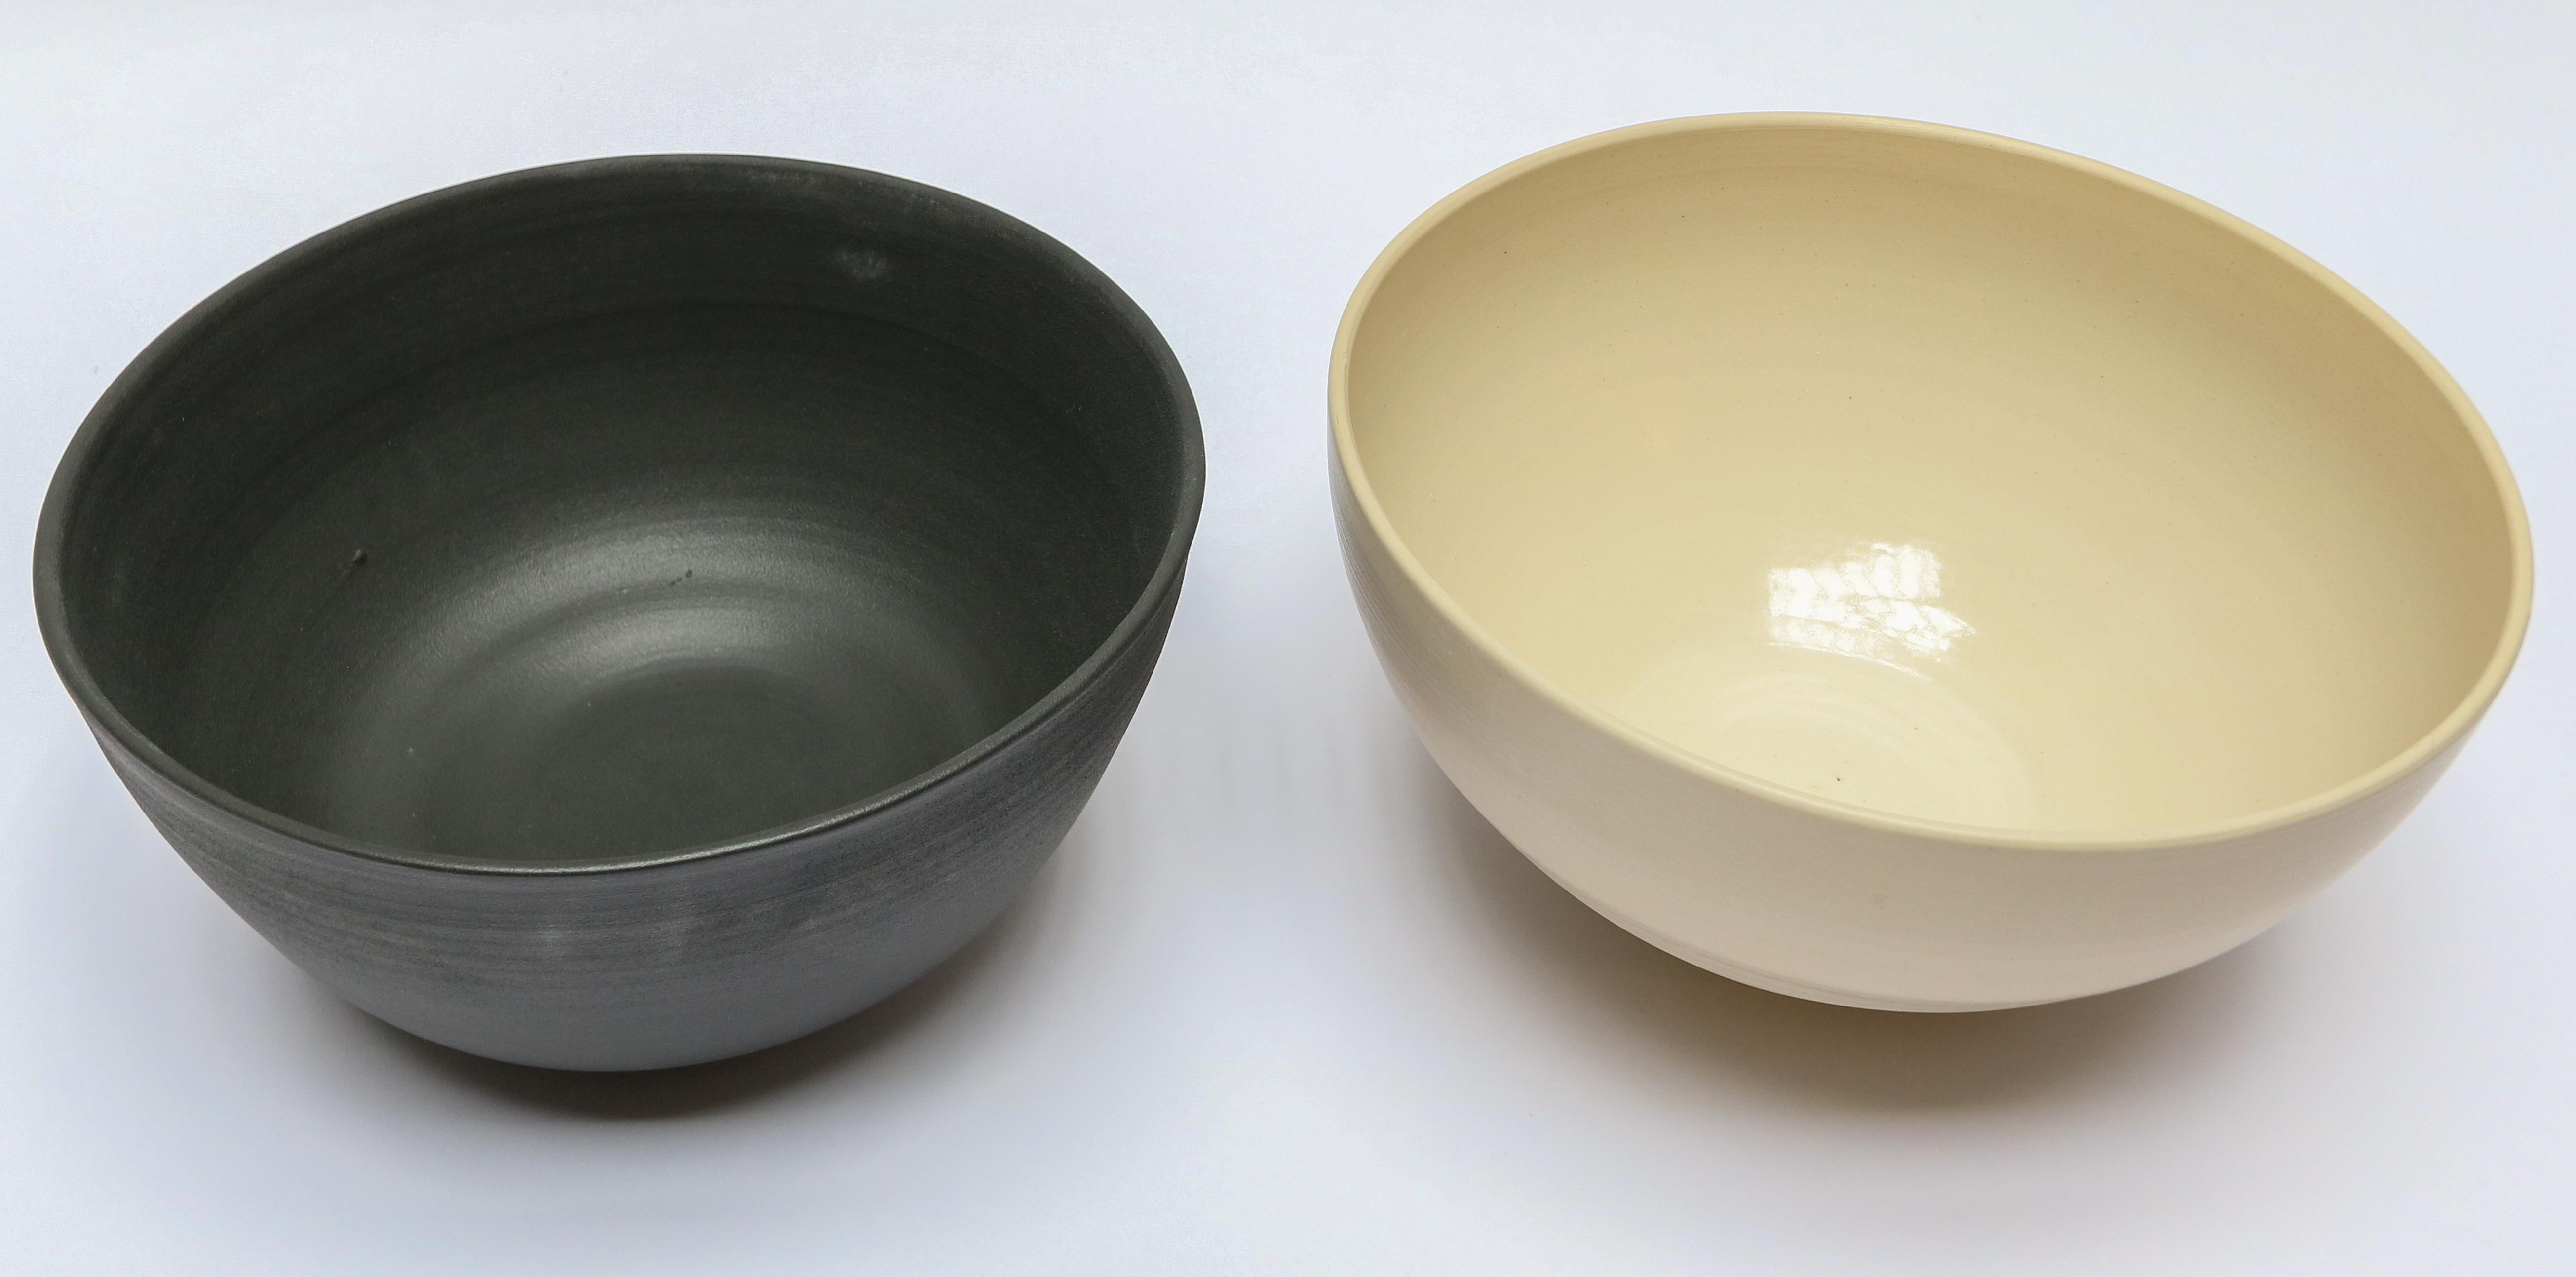 Handmade ceramic Forever bowls in blanc white (400180) and noir black (400181) by Style Union Home. Priced individually.